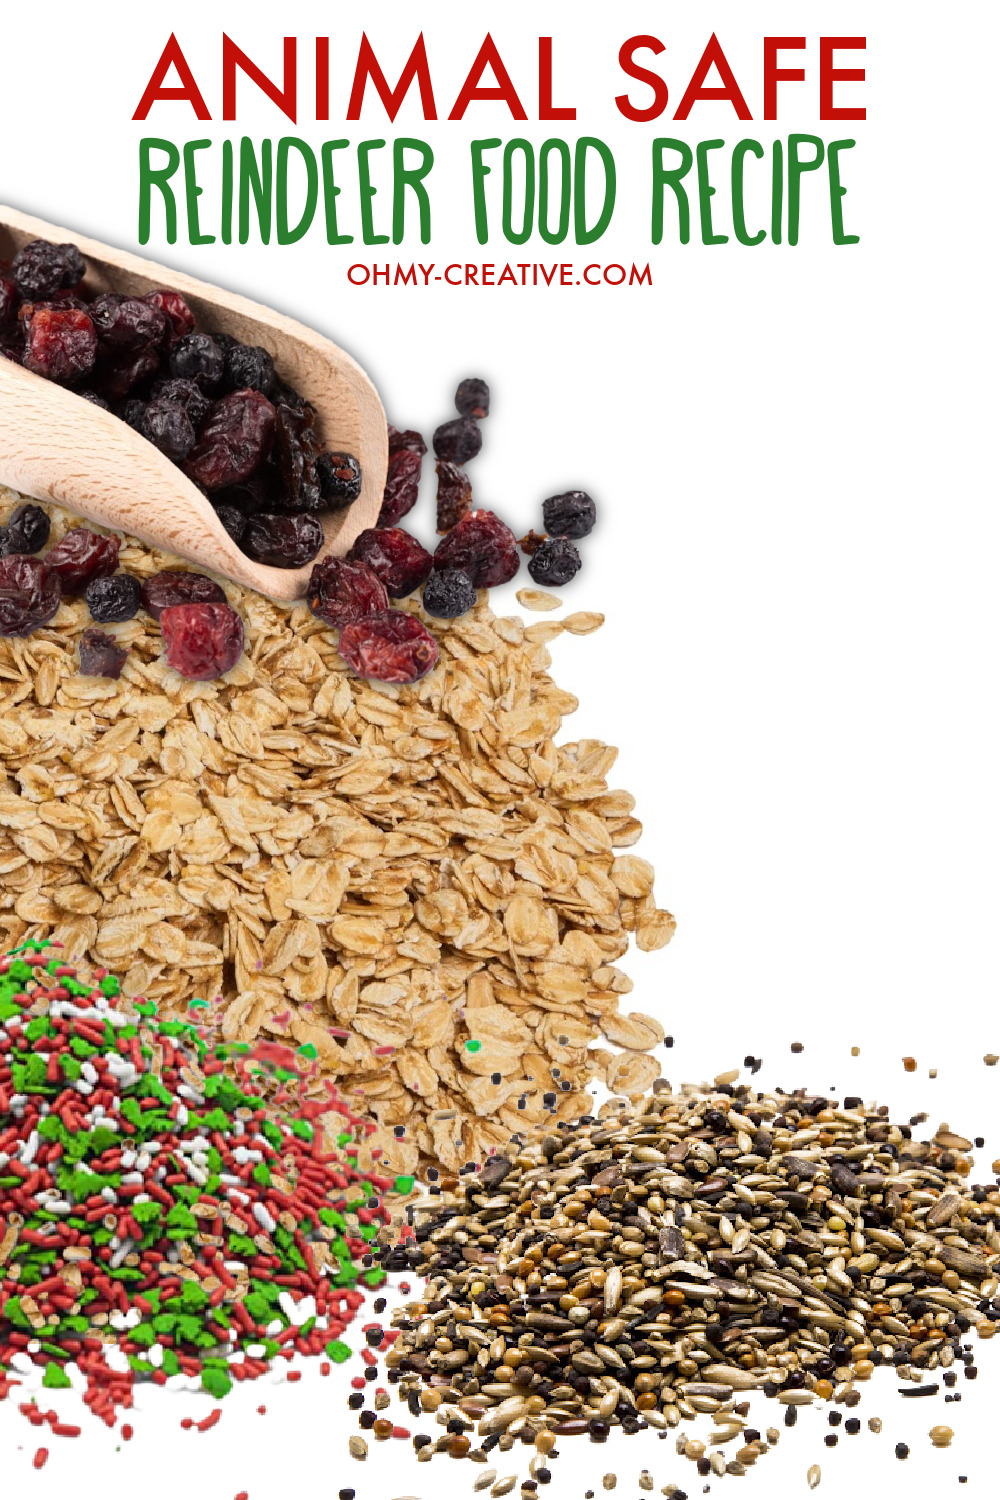 mix together equal parts of birdseed and oats. Then, add a handful of cranberries and a tablespoon of corn.